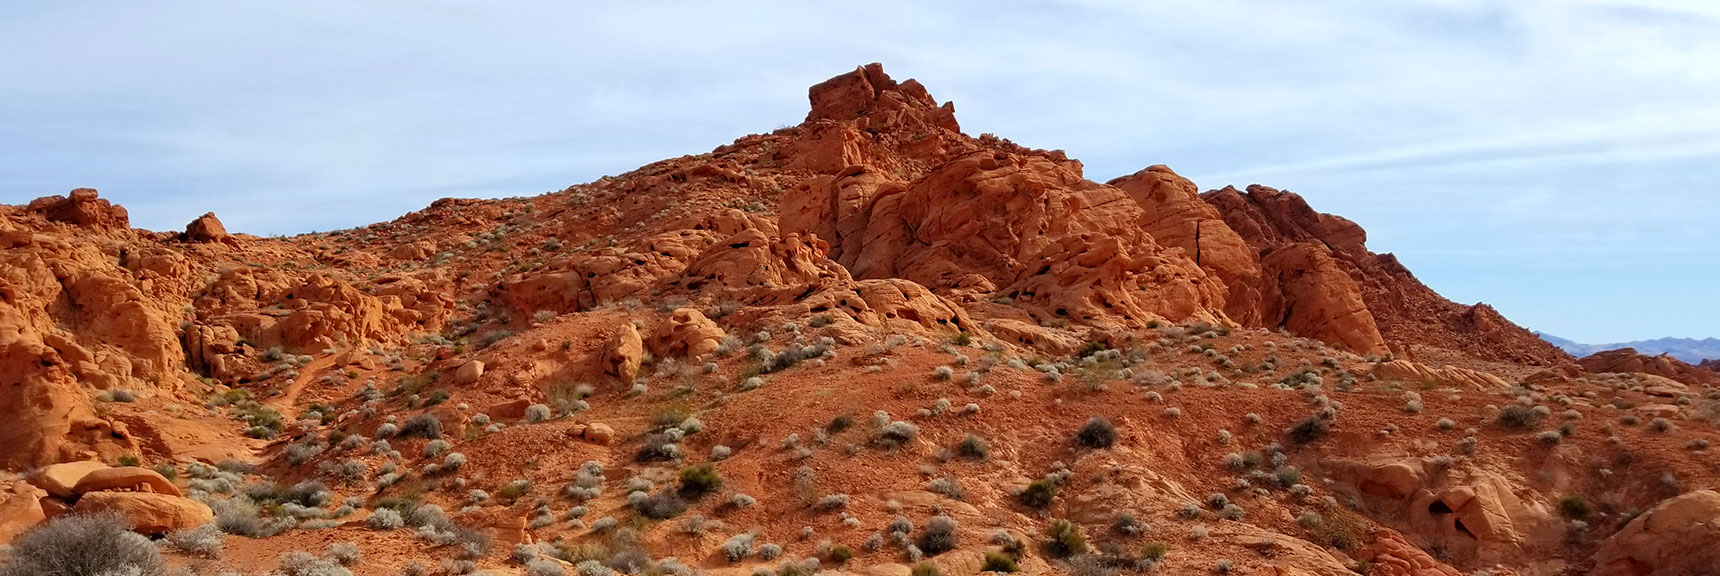 Western View of Elephant Rock Loop in Valley of Fire State Park, Nevada